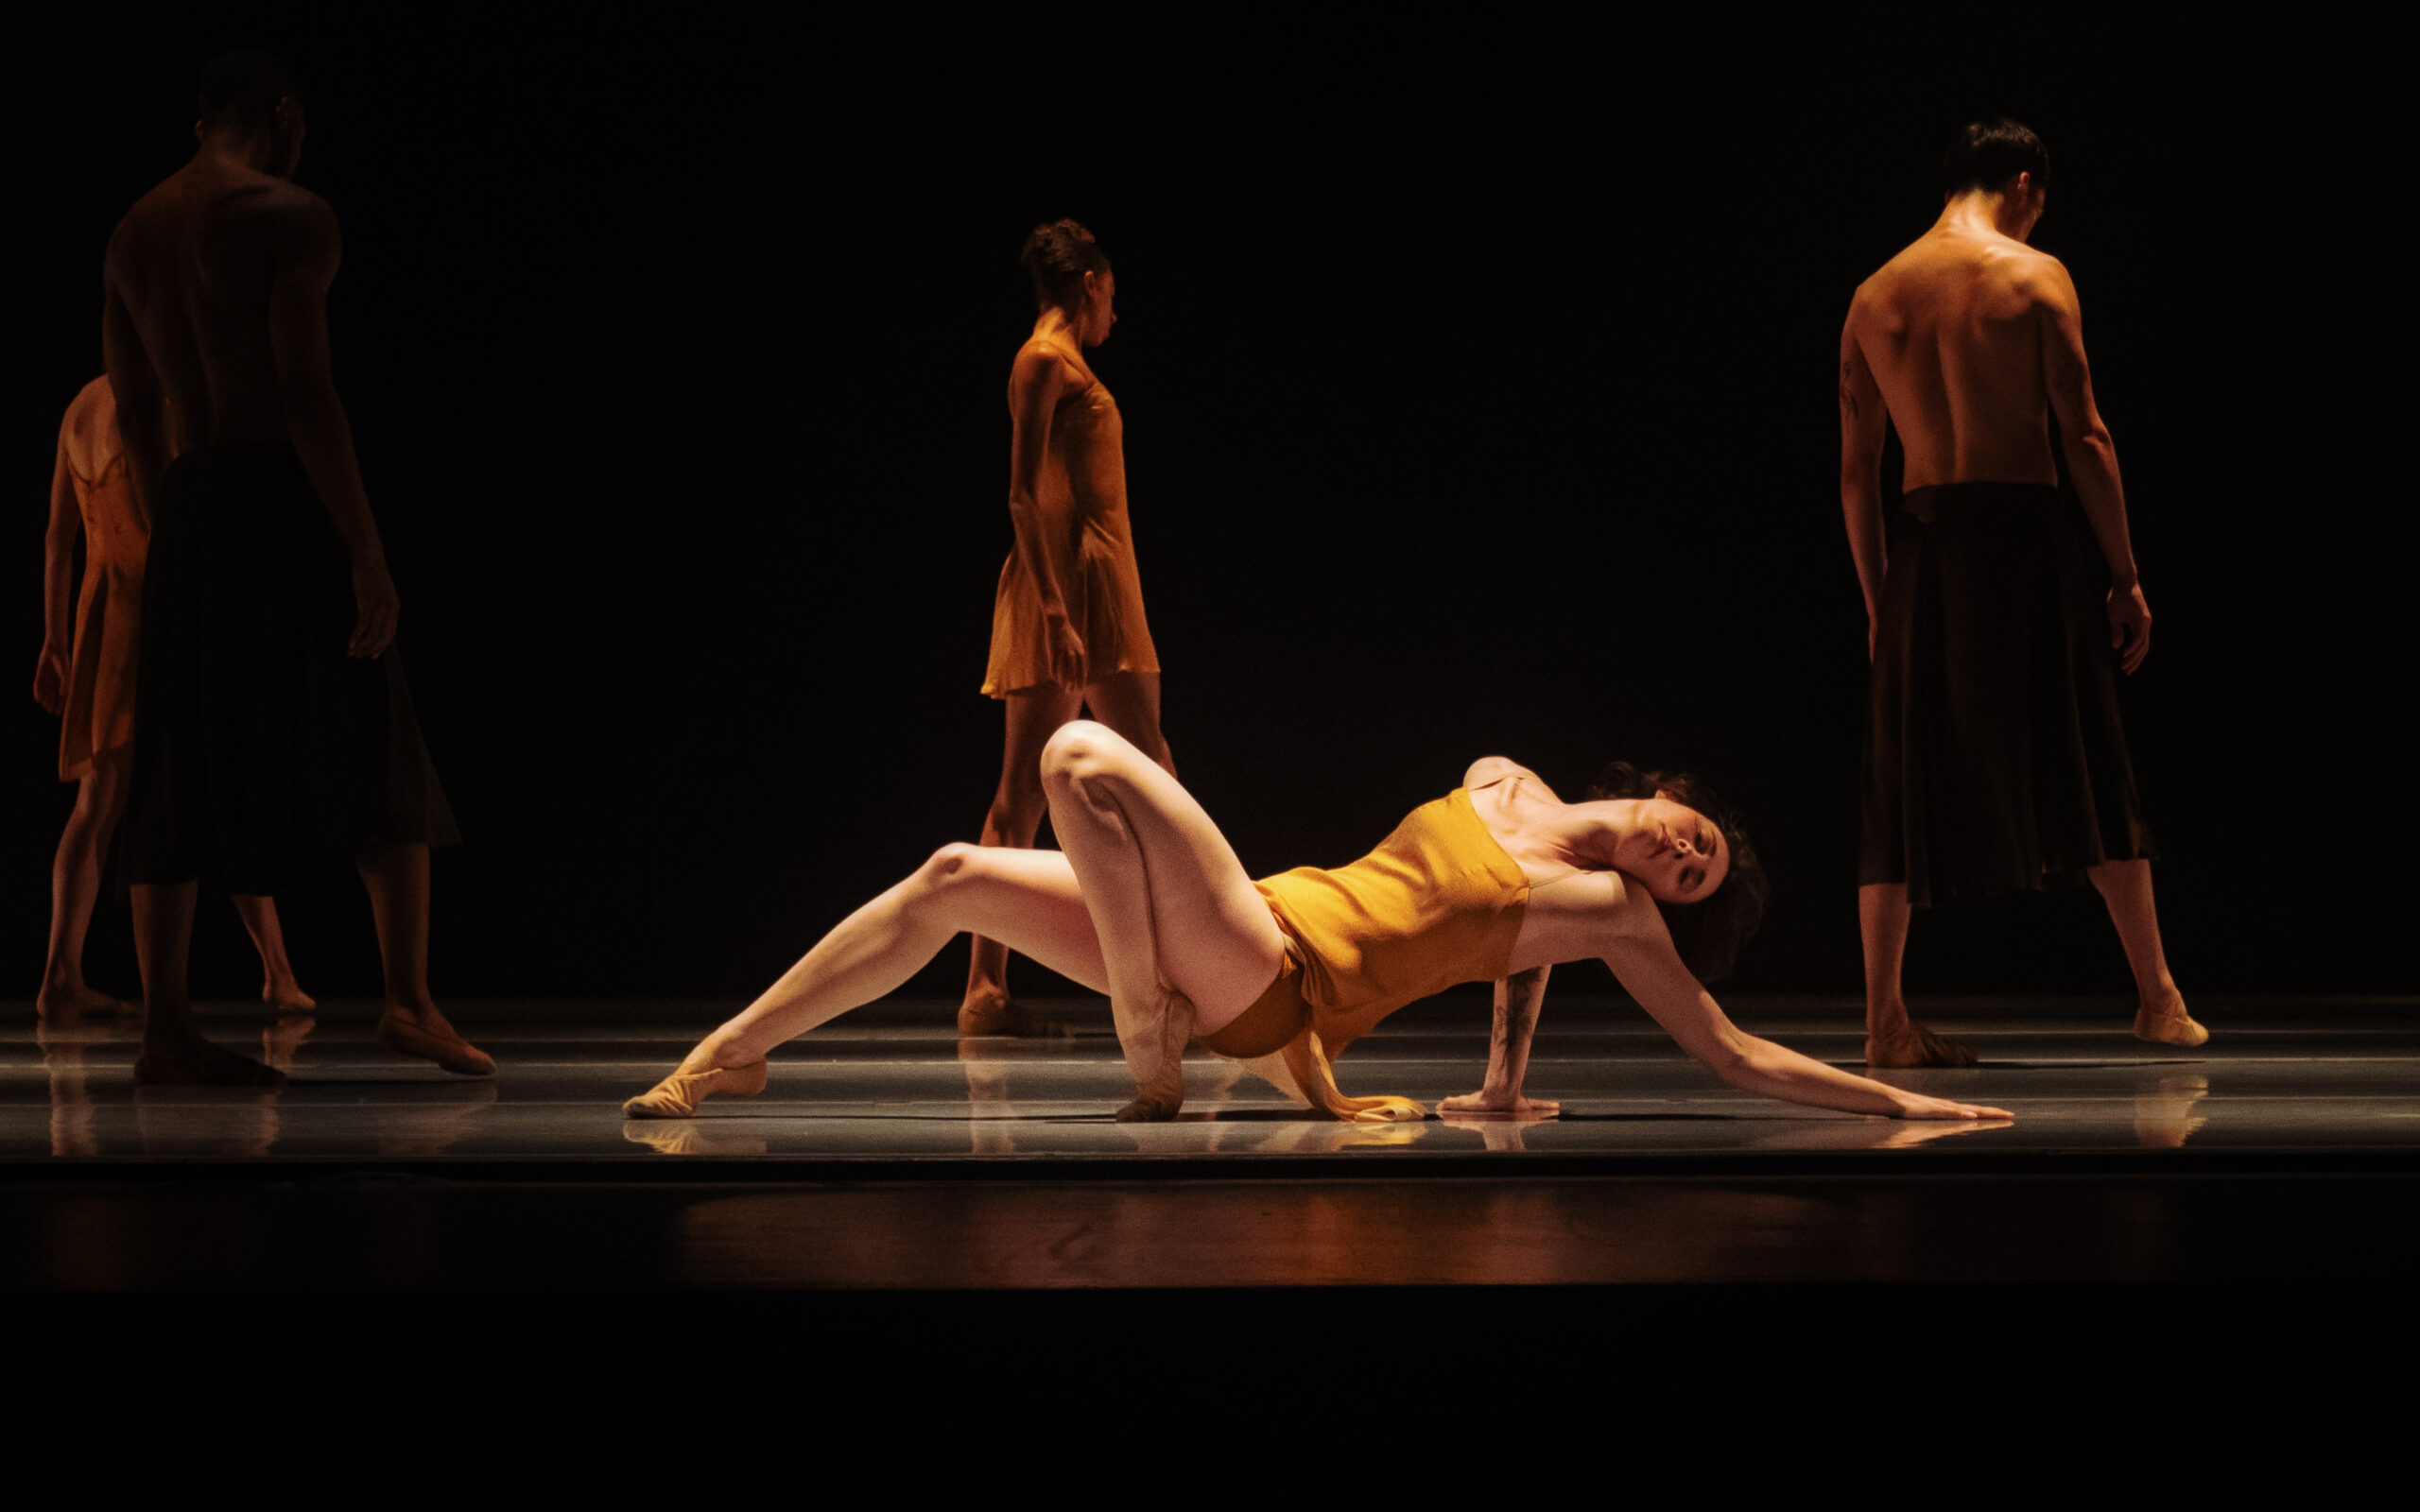 LINES Ballet company dancer Maya Harr performing floorwork in Alonzo King's "Deep River" while other company dancers walk on the stage